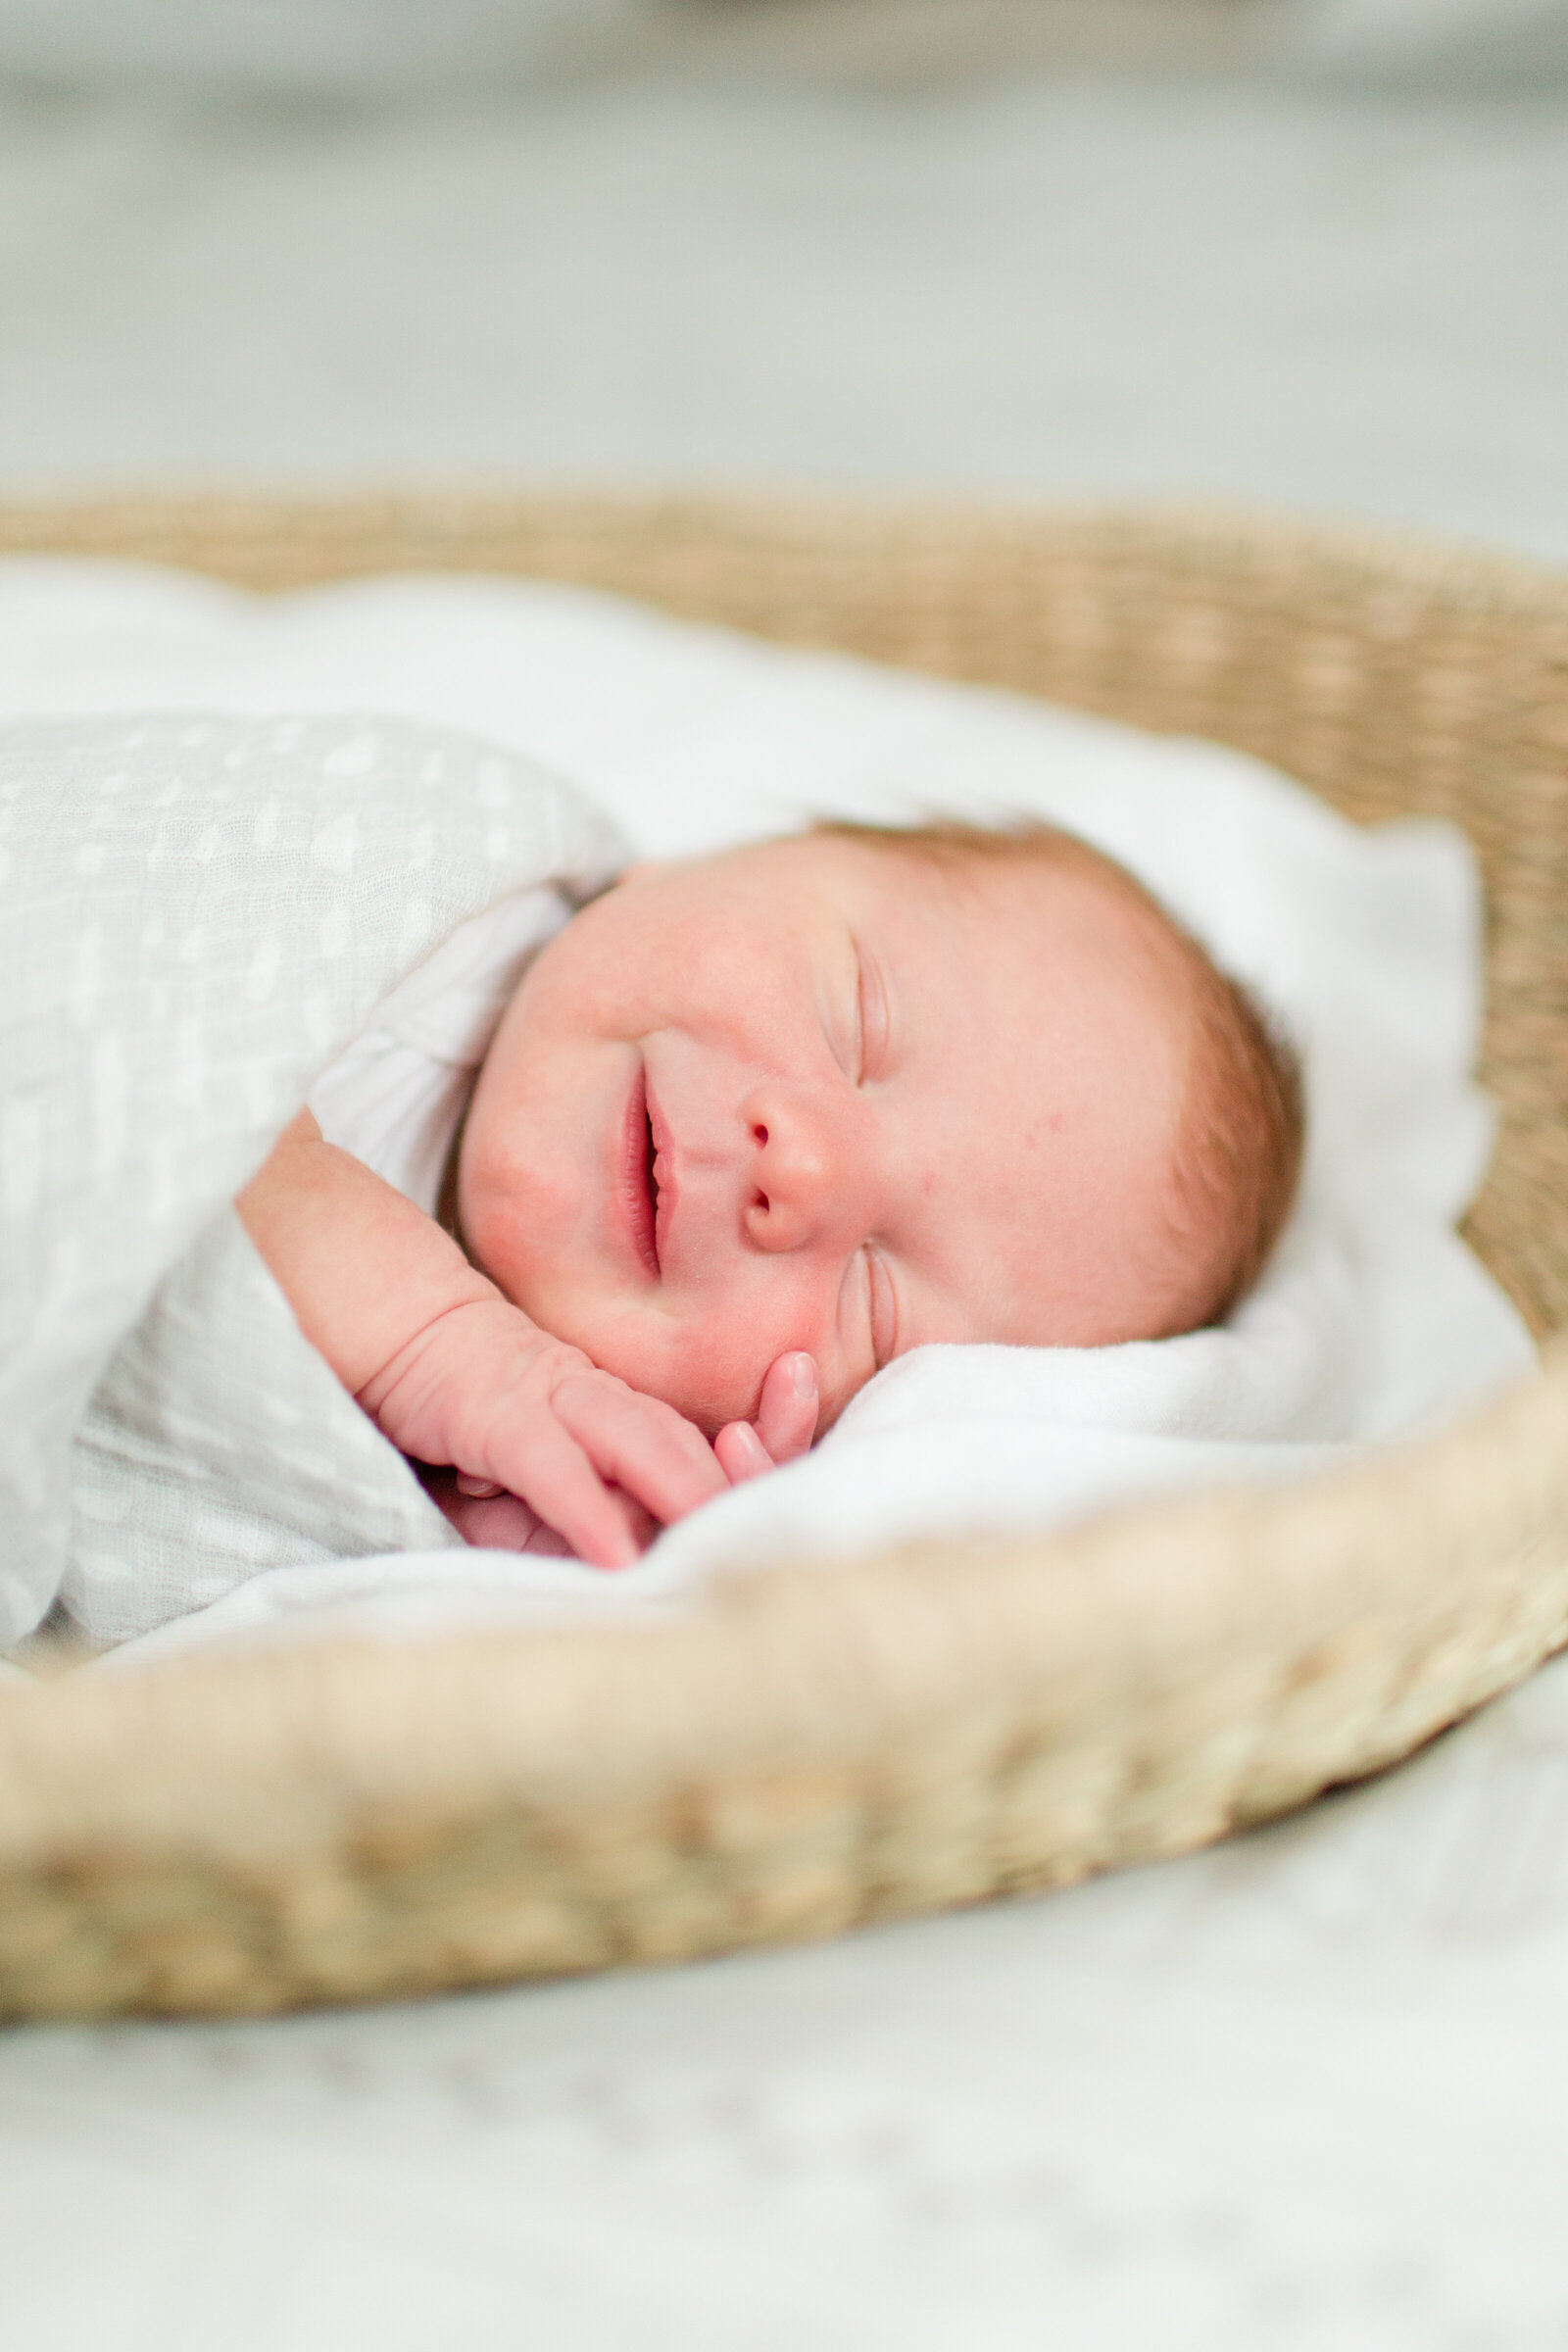 in-home newborn session in Holliston MA with Corinne Isabelle Photography